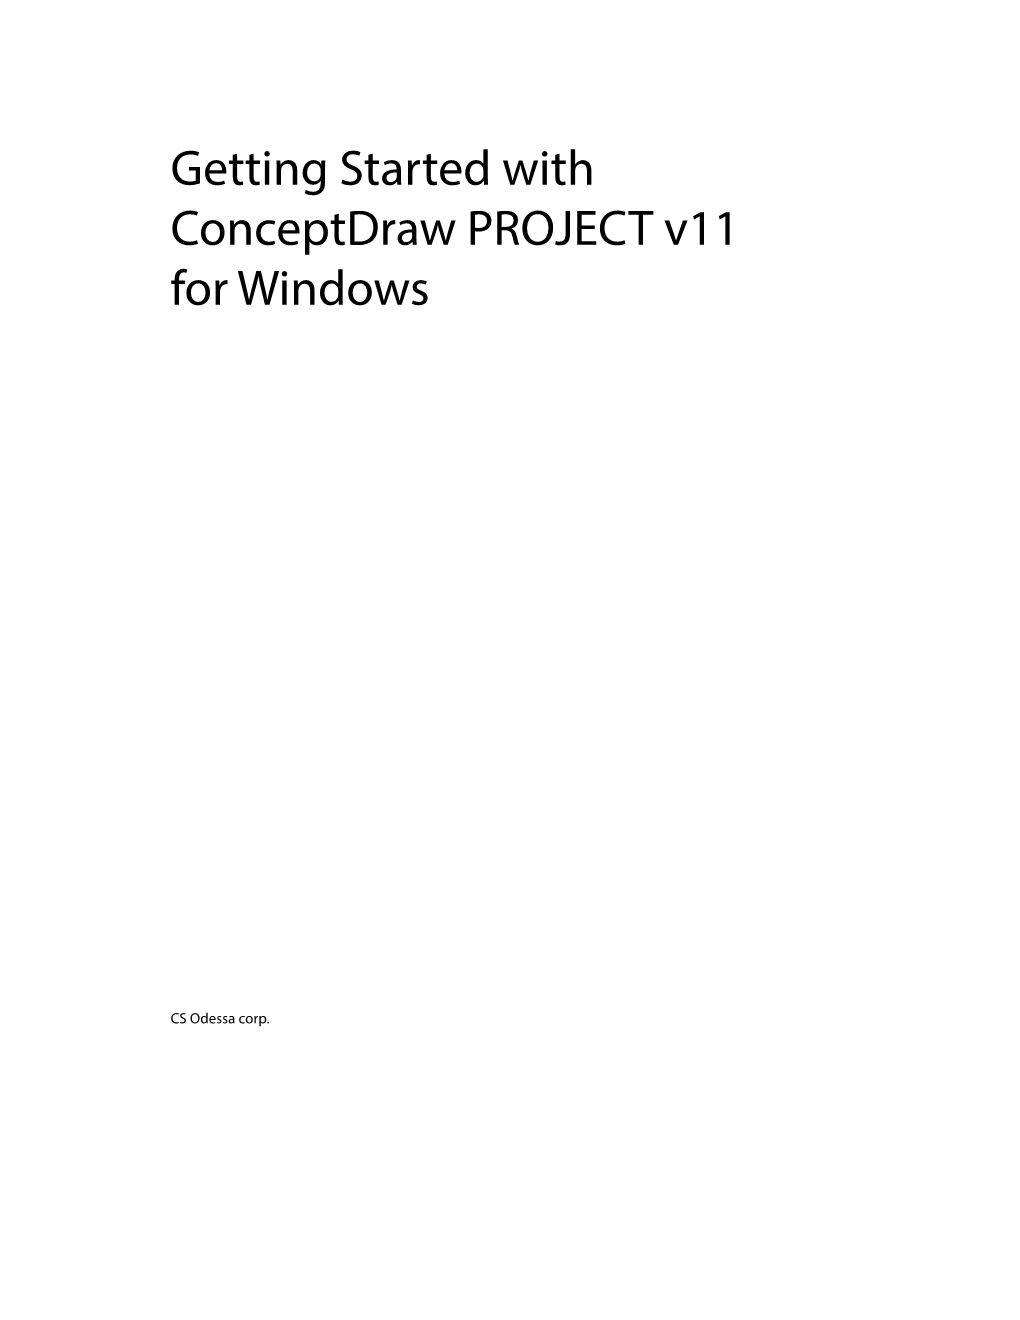 Getting Started with Conceptdraw PROJECT for Windows